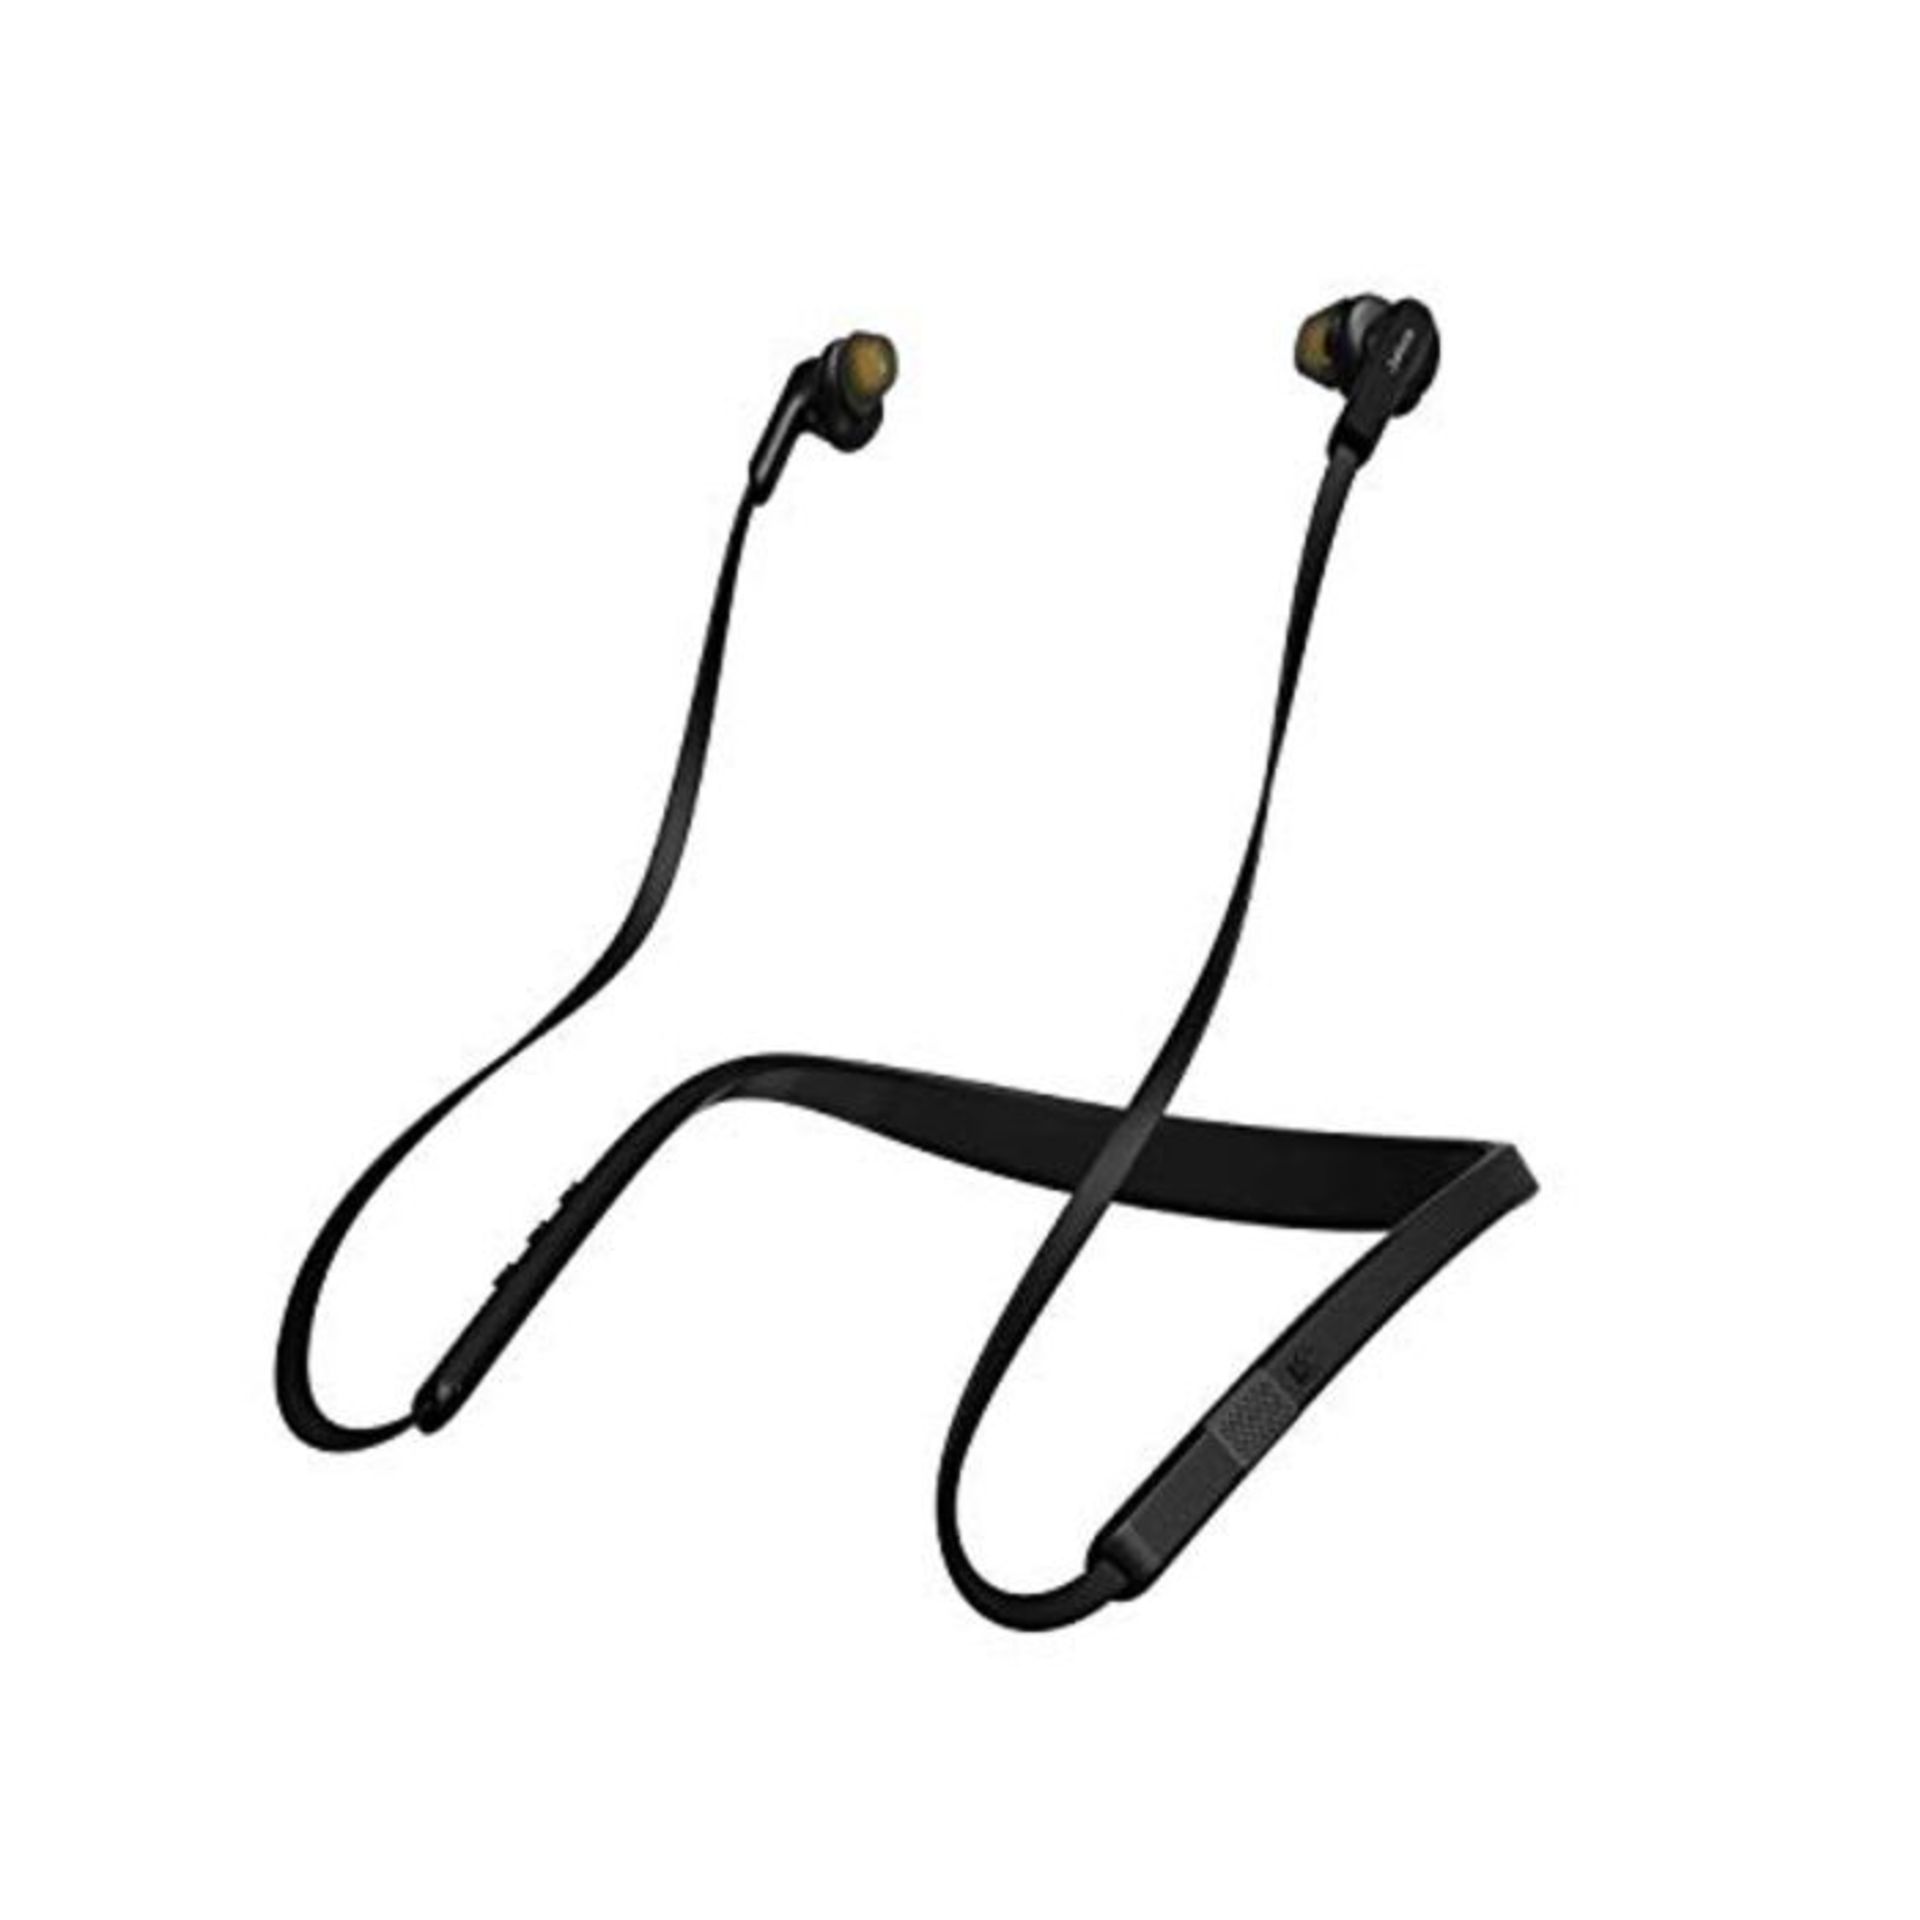 Jabra Elite 25e - Wind Protected Bluetooth Headphones for Wireless Calls and Music wit